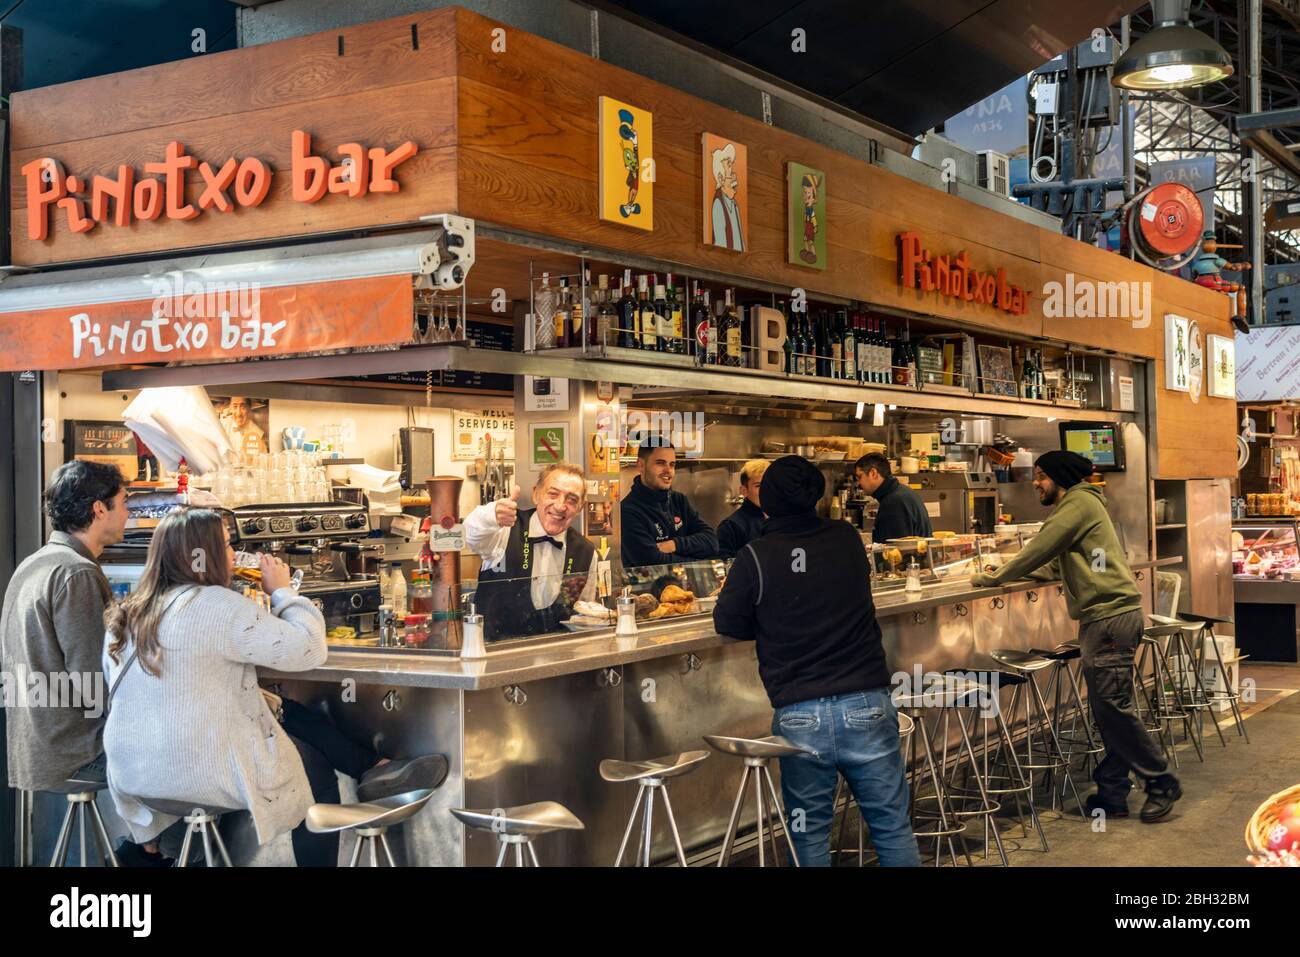 Pinotxo bar, La Boqueria Market, The flamboyant owner Juanito Bayén warmly welcomes customers as he has done for decades, becoming a true local legend Stock Photo